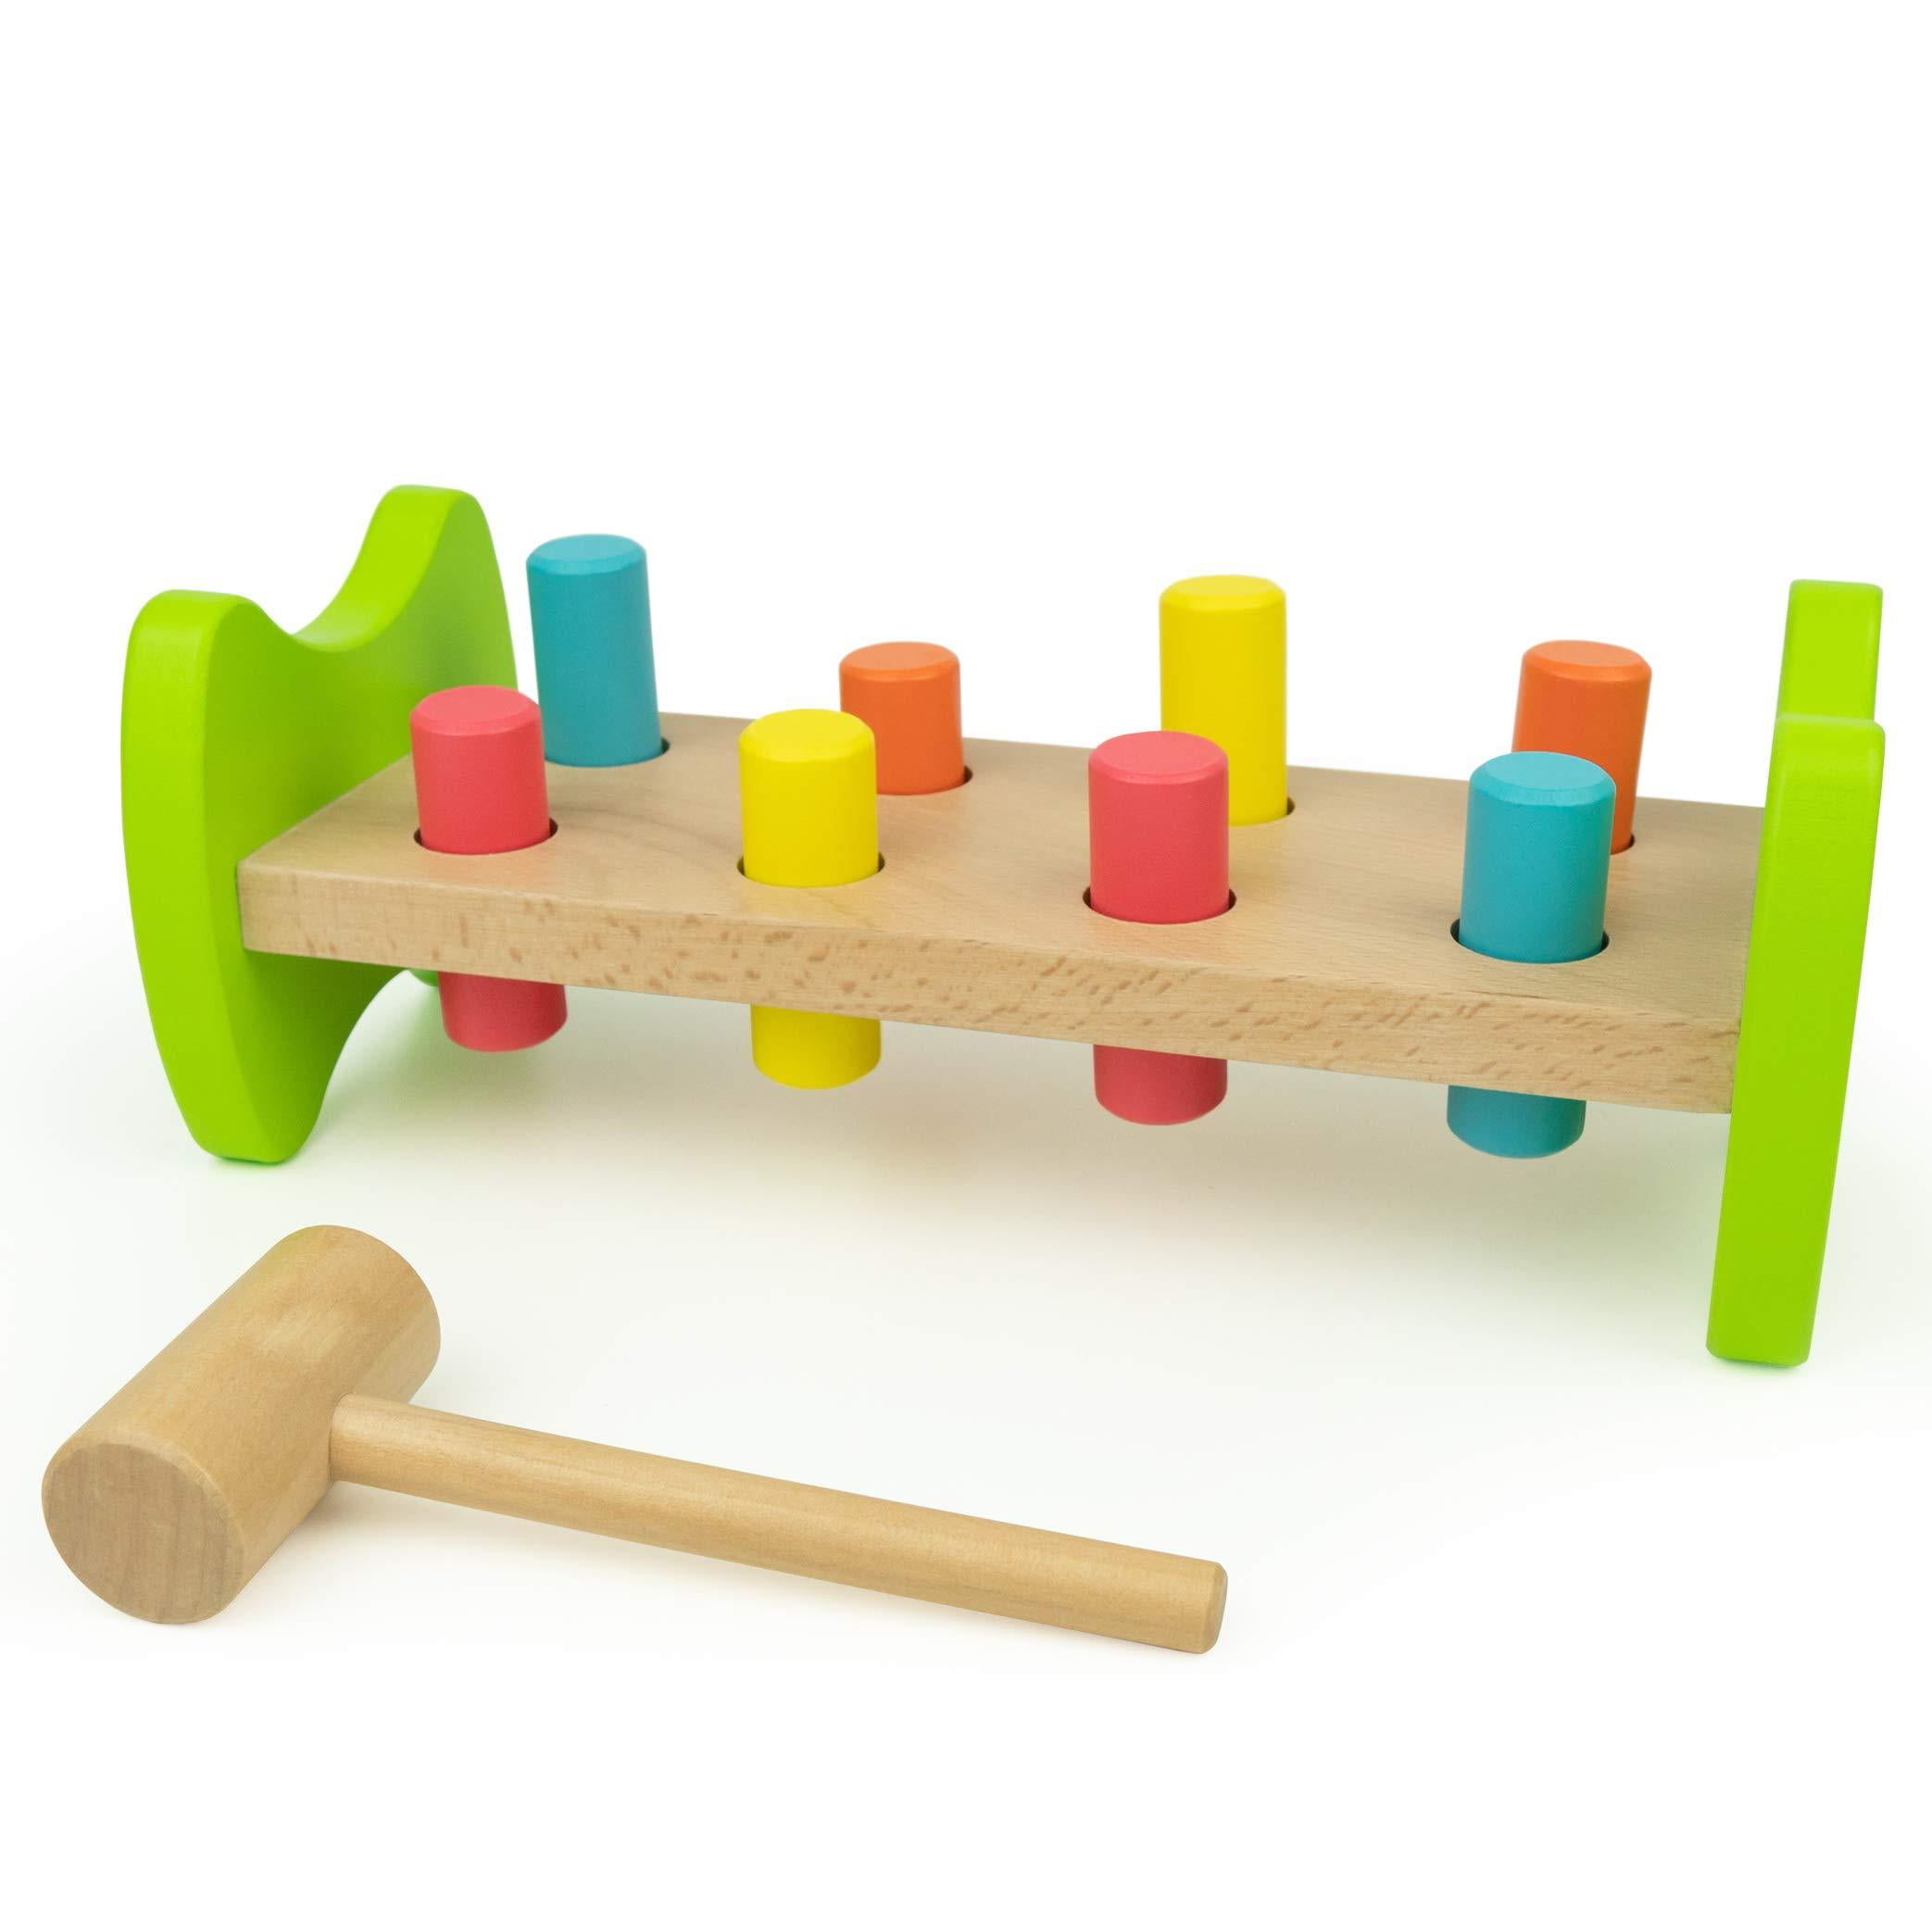 Bimi Boo Hammer Toy for Toddlers - Pounding Bench Wooden Toys with 